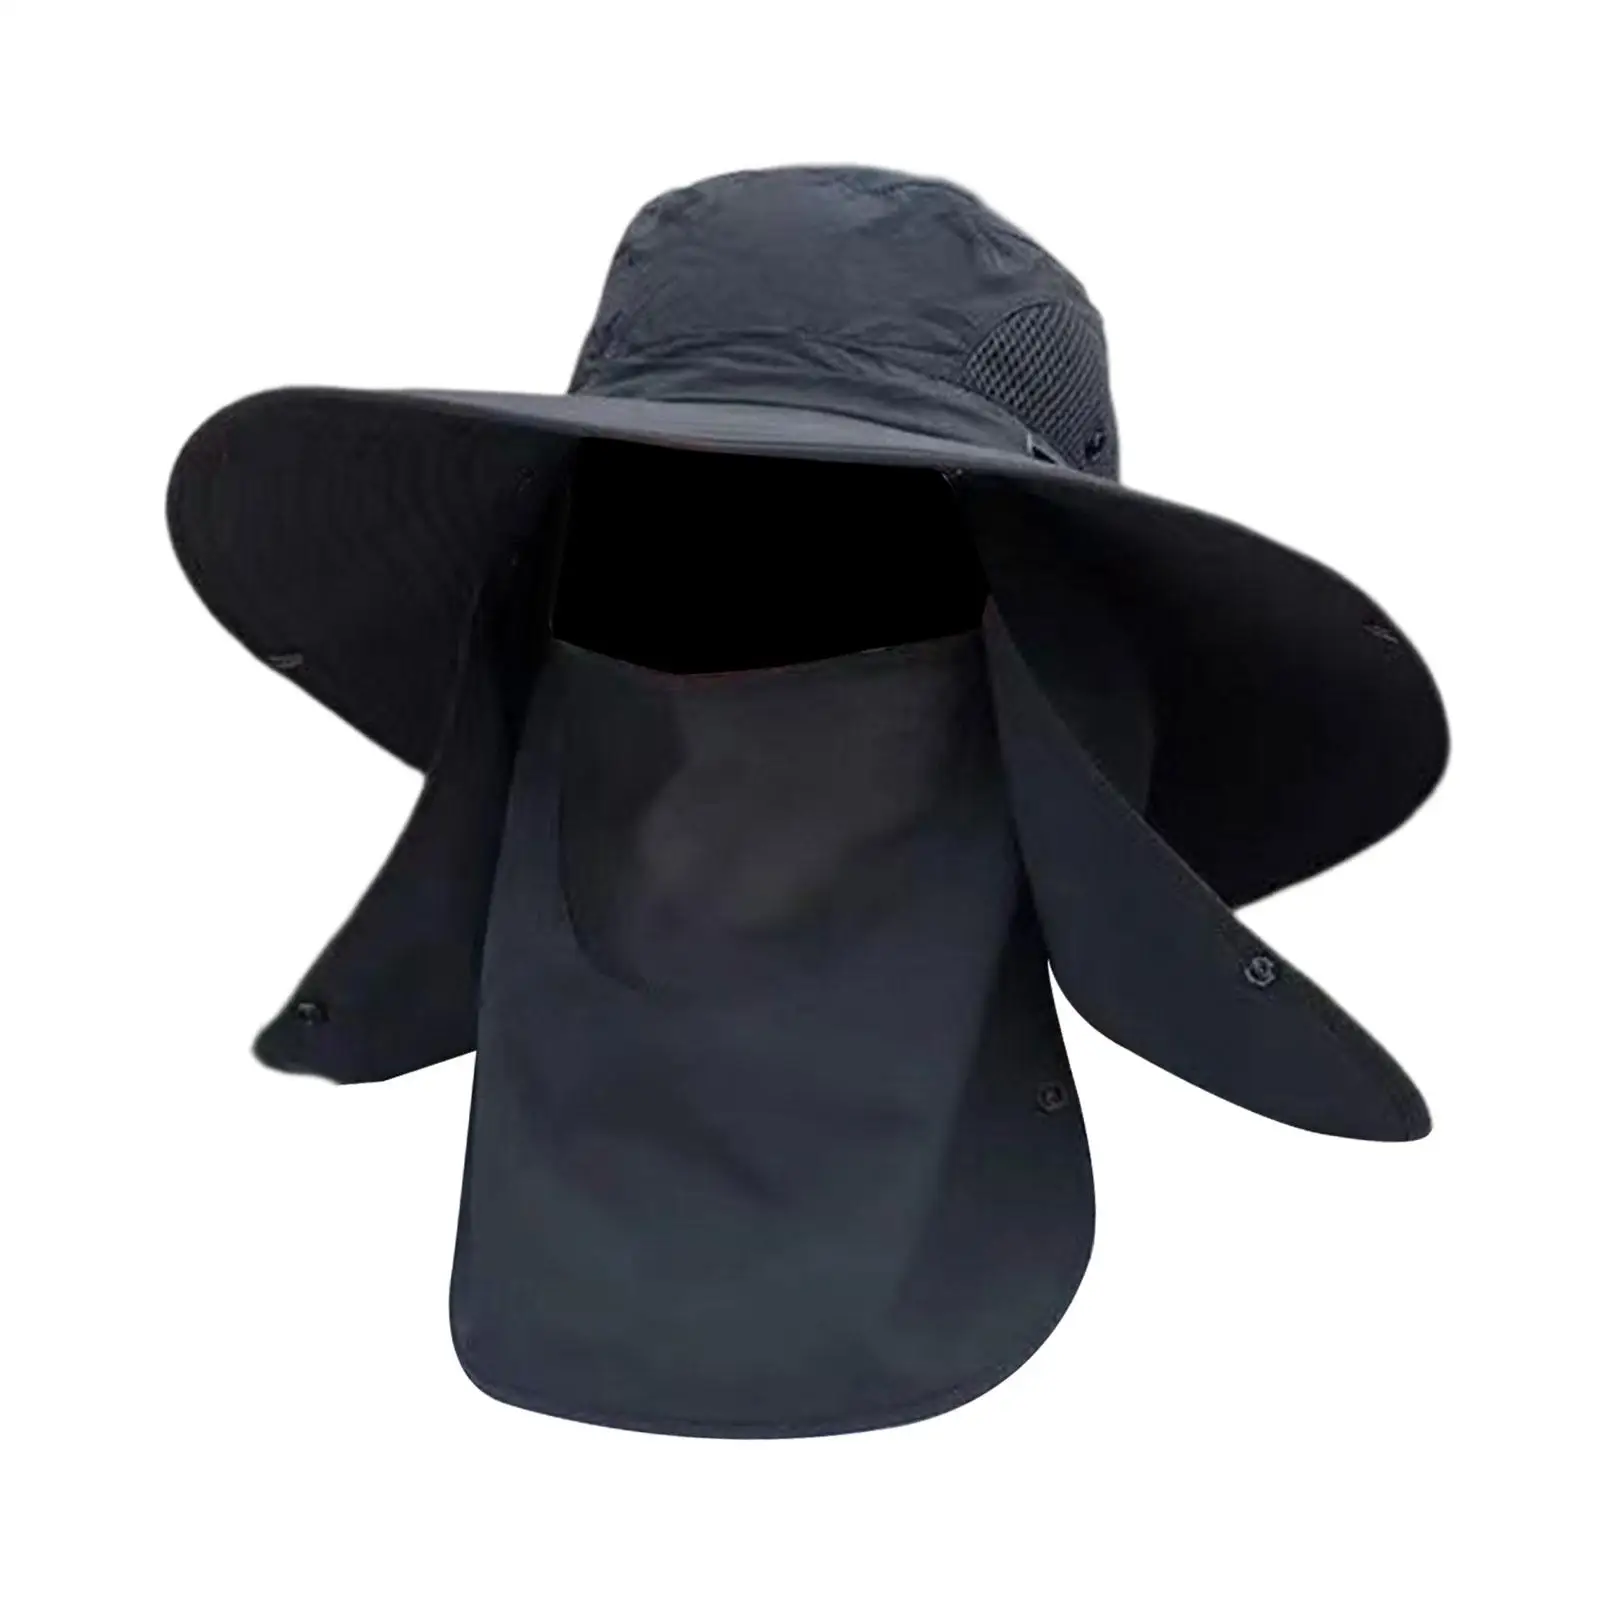 Removable Cap Neck Face Cap Foldable Sun Protection Bucket Hat Fishing Hat for